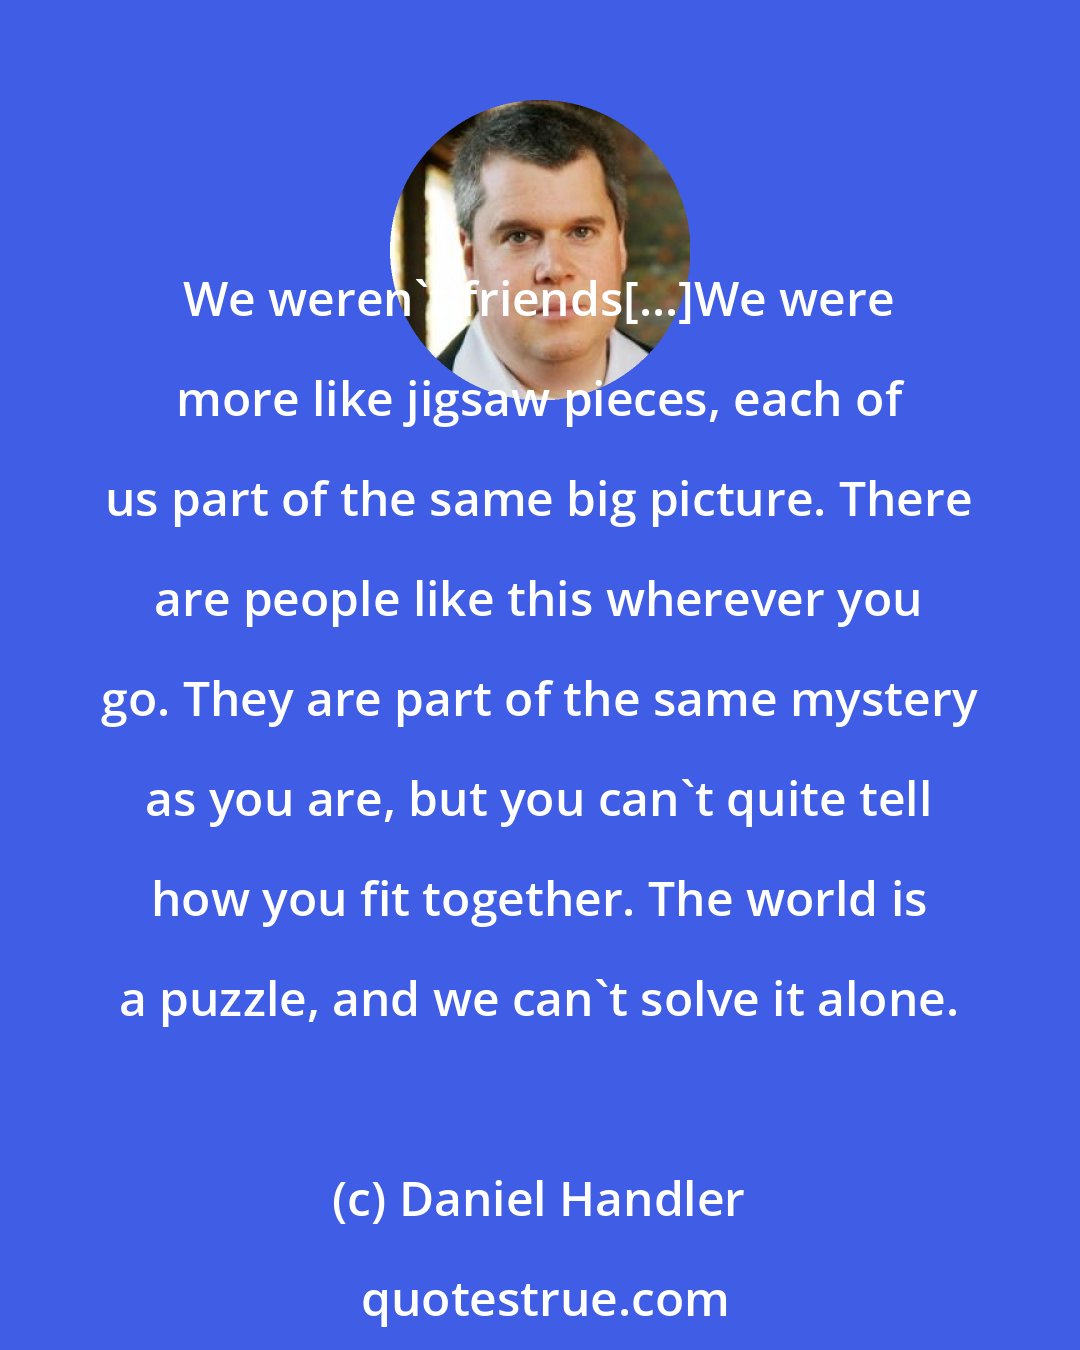 Daniel Handler: We weren't friends[...]We were more like jigsaw pieces, each of us part of the same big picture. There are people like this wherever you go. They are part of the same mystery as you are, but you can't quite tell how you fit together. The world is a puzzle, and we can't solve it alone.